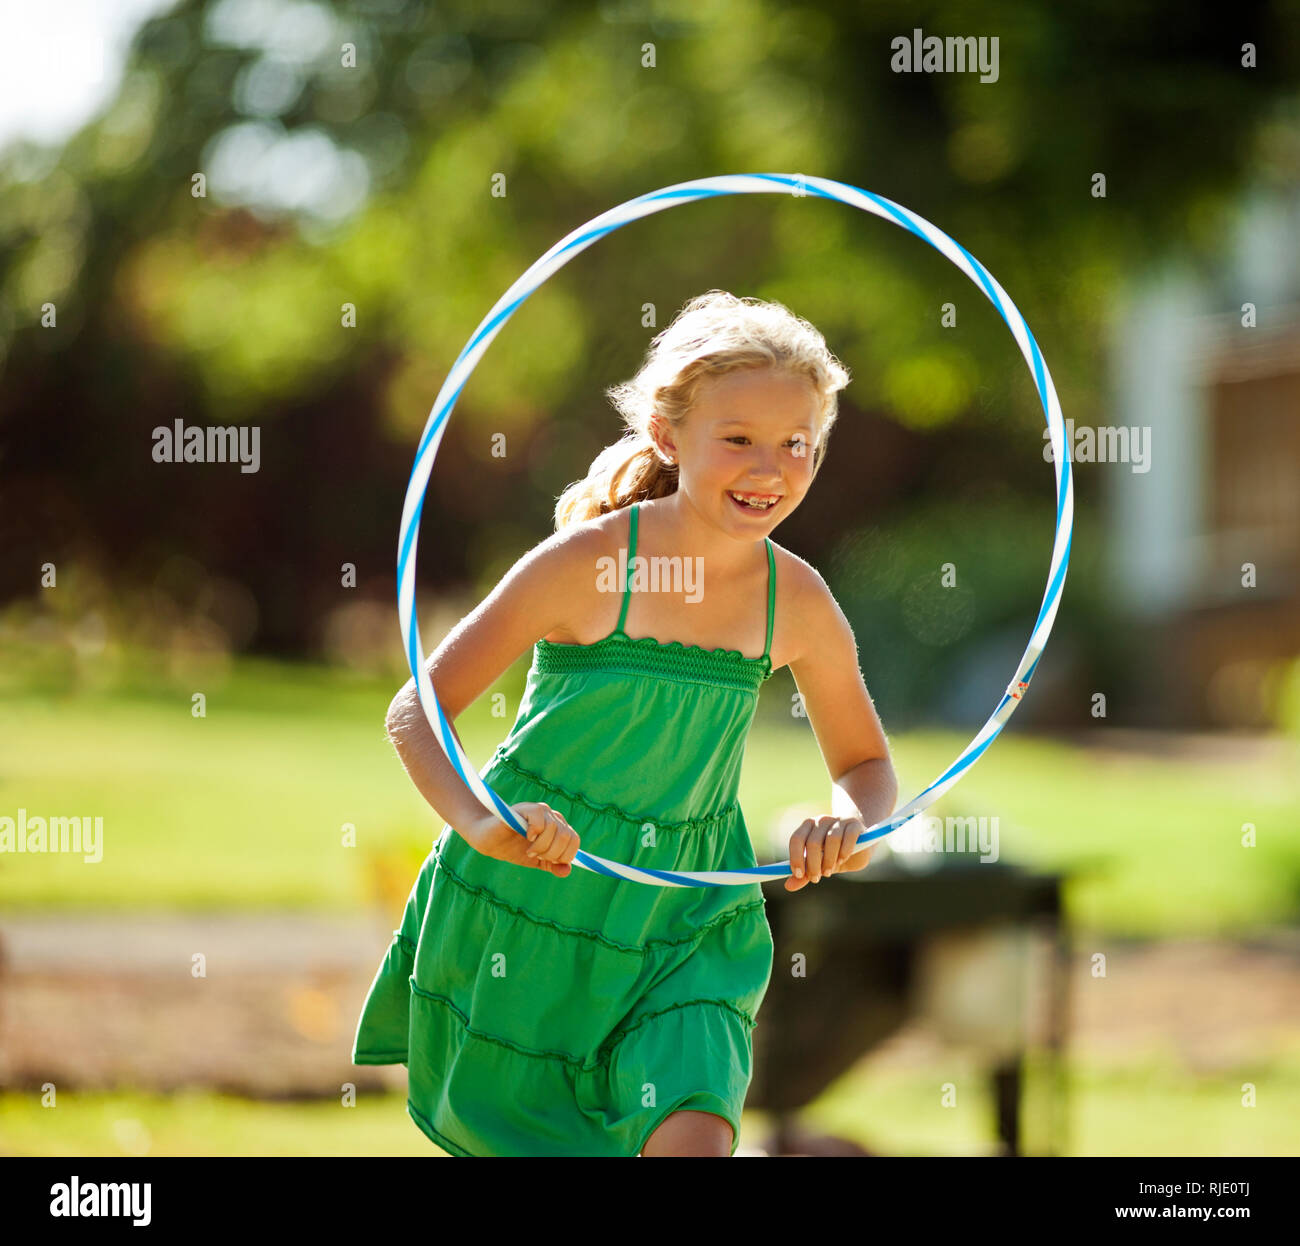 Happy young girl playing with a hula hoop in her back yard. Stock Photo